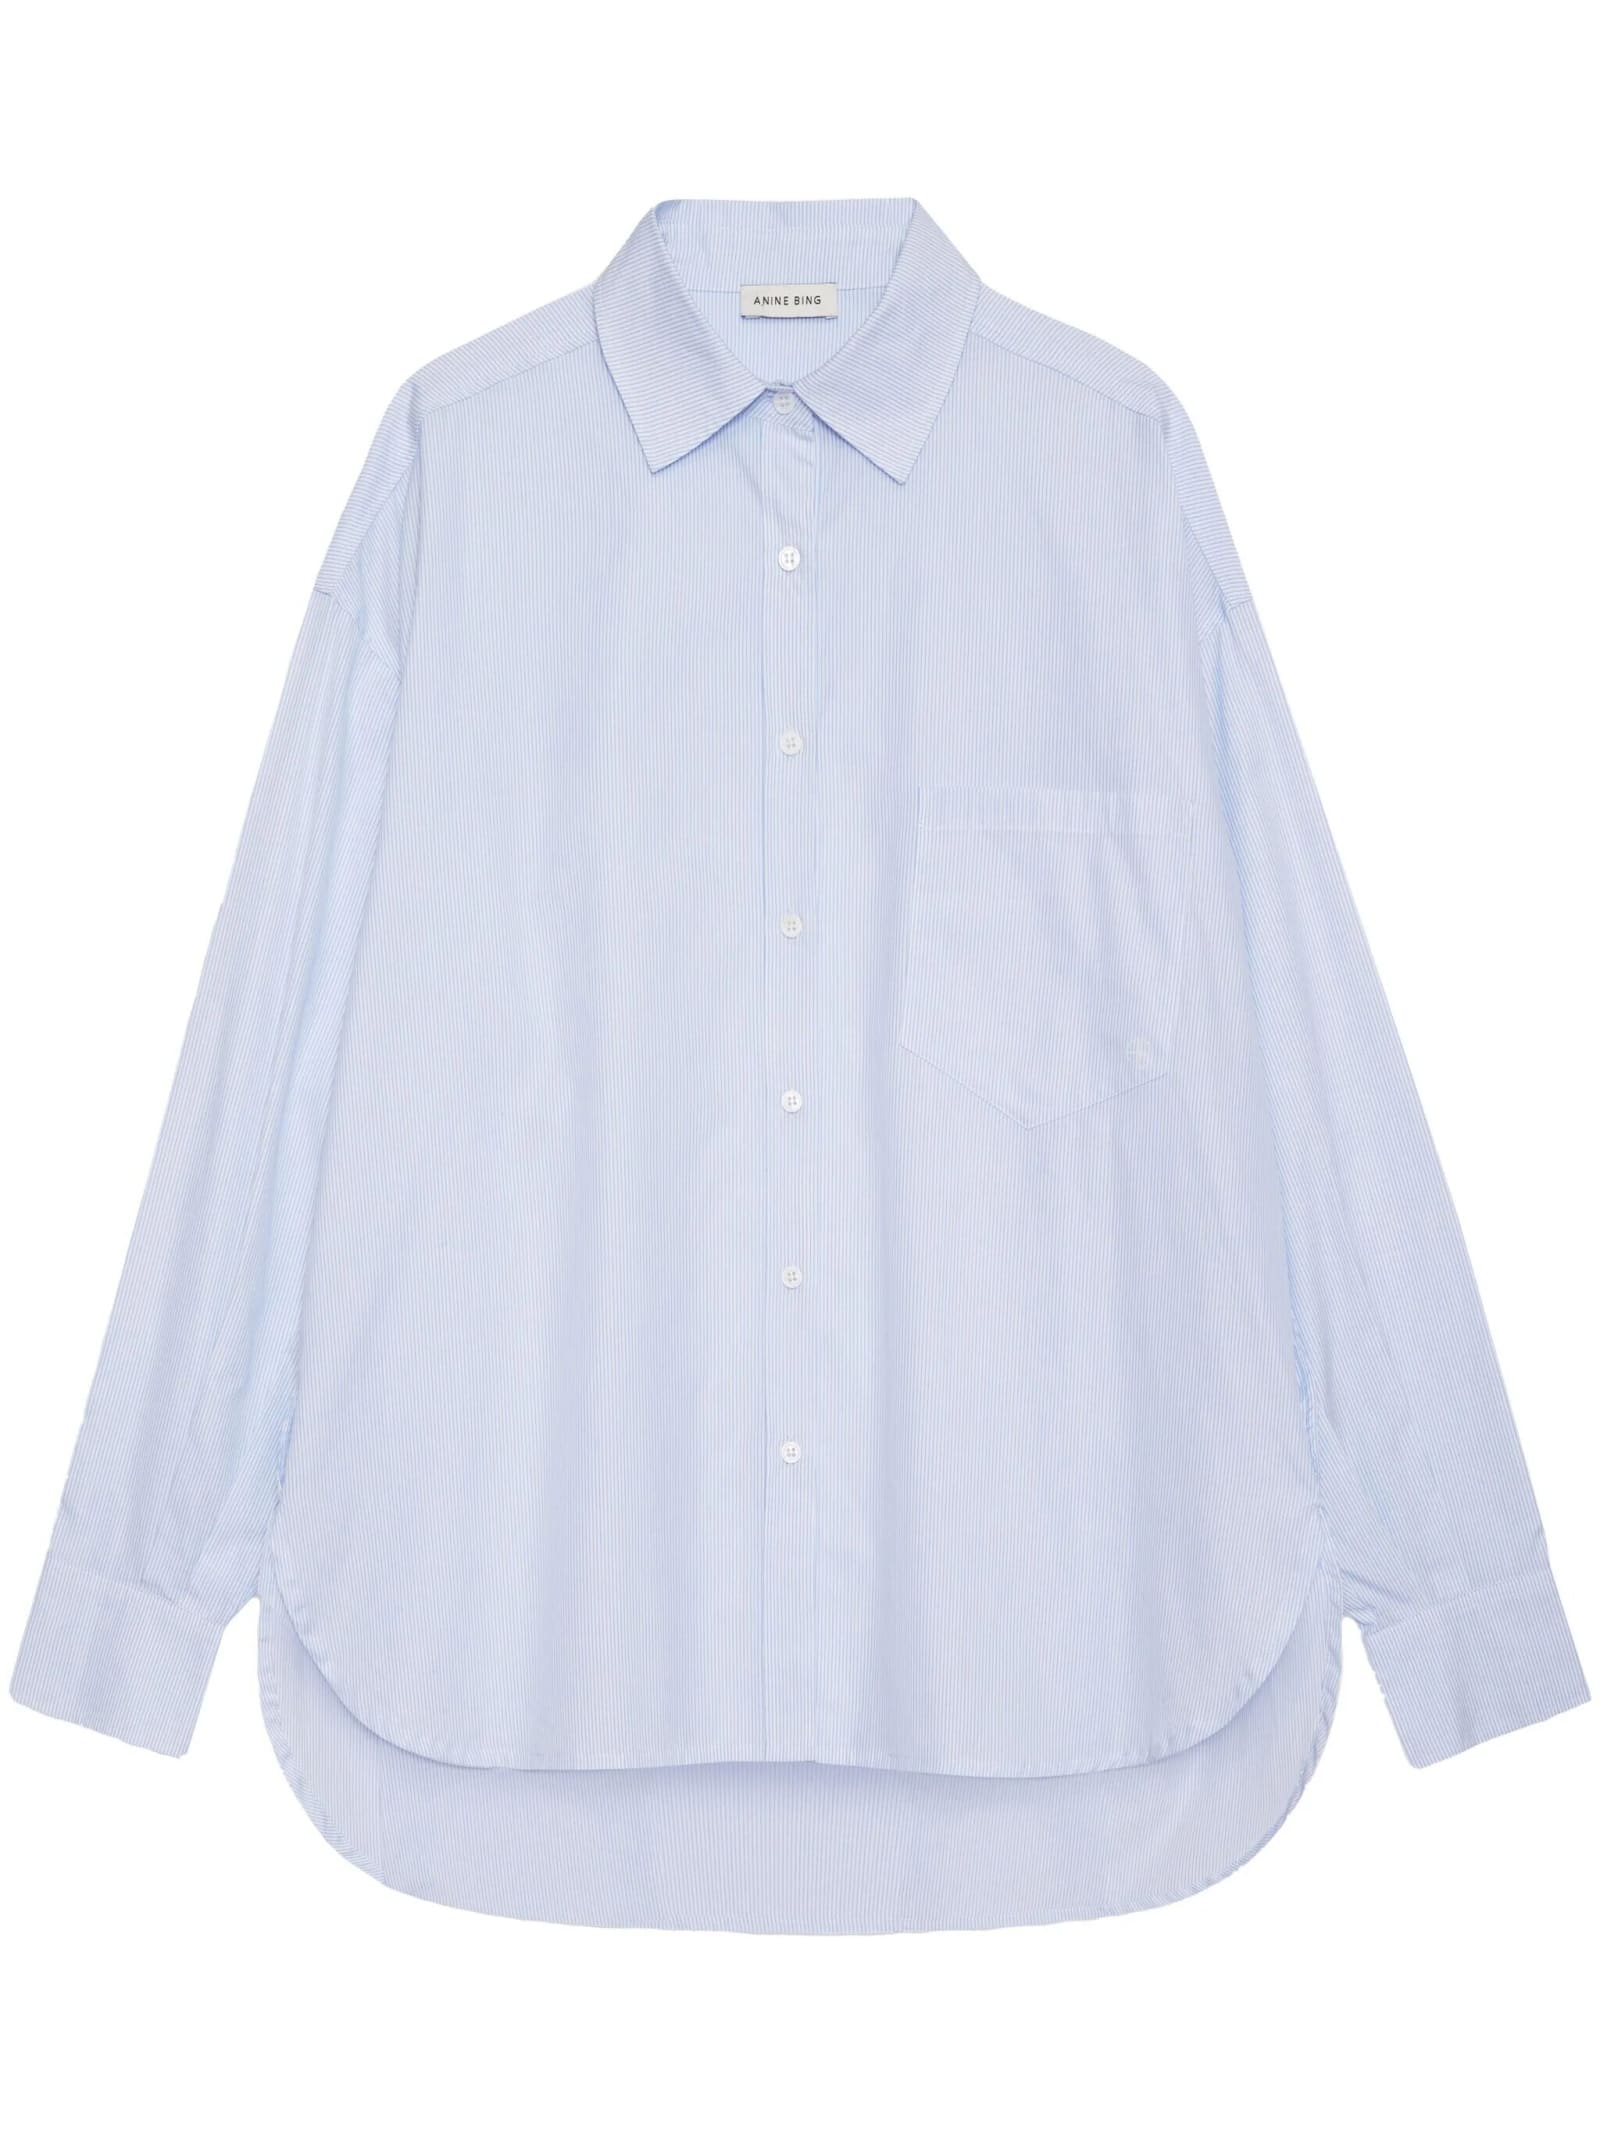 Shop Anine Bing Chrissy Shirt Stripe In Blue And White